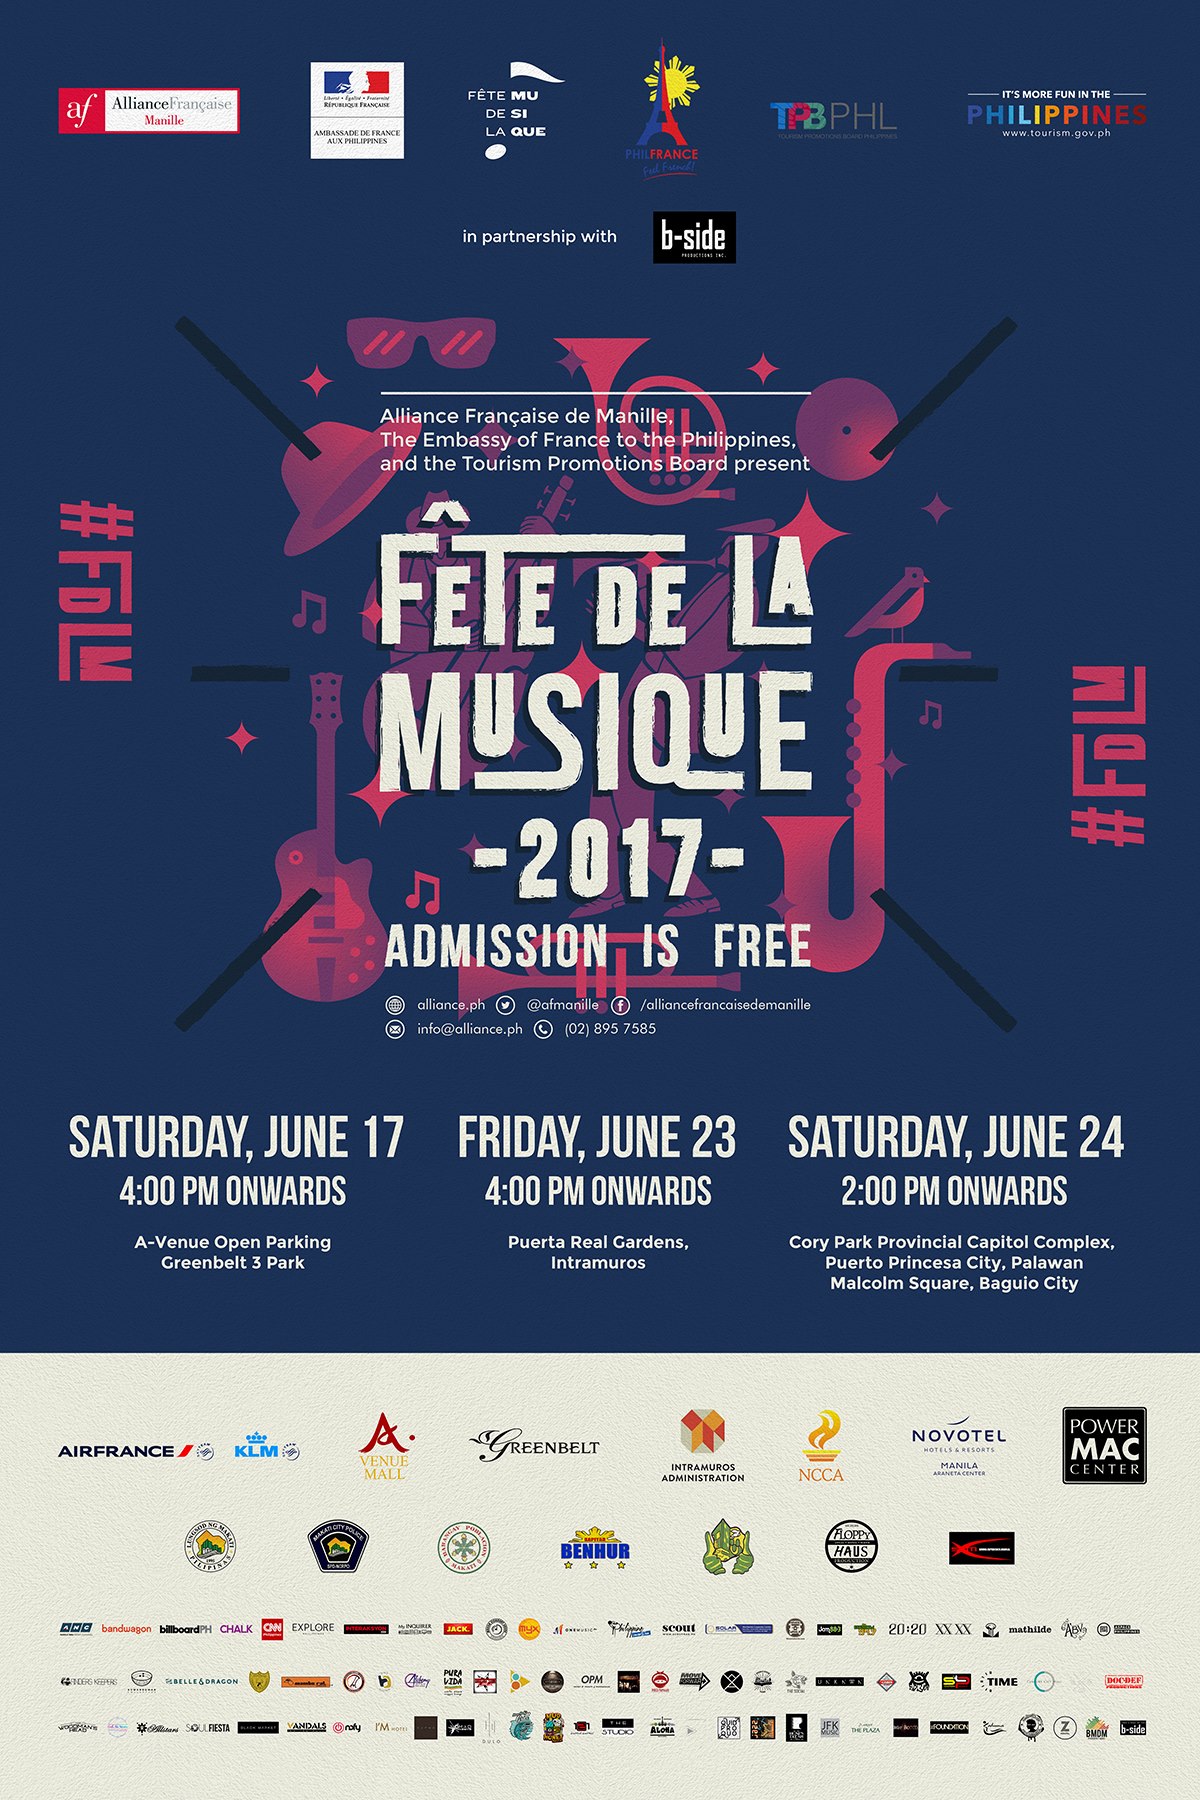 Fête de la Musique Greenbelt Main Stage (Official event page) Public · Hosted by Alliance française de Manille clock Saturday, June 17 at 4 PM - 1 AM Jun 17 at 4 PM to Jun 18 at 1 AM pin Show Map Greenbelt 3 Arnaiz Ave, Makati Fête de la Musique will once again be staging one of its Makati stages at the Greenbelt 3 Park on June 17, 2017 from 4:00 pm onwards. We have prepared a great line-up for you consisting of great and sought-after Filipino musicians performing different genres of music: 4:00 - 4:45 PM Ourselves the Elves Garage (Folk / Alt Country) 4:45 - 5:30 PM Oh, Flamingo (Indie Rock) 5:30 - 6:15 PM Brat Pack (Rock & Roll / Blues) 6:15 - 7:00 PM Toni B. Quirky (Pop / Jazz / Swing) 7:00 - 7:45 PM Tandems ‘91 (Electronic Music) 7:45 - 8:30 PM Taken By Cars (Indie Rock) 8:30 - 9:15 PM Chocolate Grass (Soul / Jazz) 9:15 - 10:00 PM Kat Agarrado (Funk / Soul / Jazz) 10:00 - 11:00 PM BP Valenzuela (Ambient / Electronic Pop) 11:00 - 11:45 PM Tarsius (Electronica) ADMISSION FOR FETE DE LA MUSIQUE IS FREE! The 23rd Edition of Fête de la Musique is brought to you by the Alliance Française de Manille, Embassy of France to the Philippines, Tourism Promotions Board with B-Side Productions. --- Alliance française de Manille added 6 new photos. June 2 at 6:14pm · Presenting the main stages and over 30 pocket stages of the 23rd Edition of Fête de la Musique in the Philippines